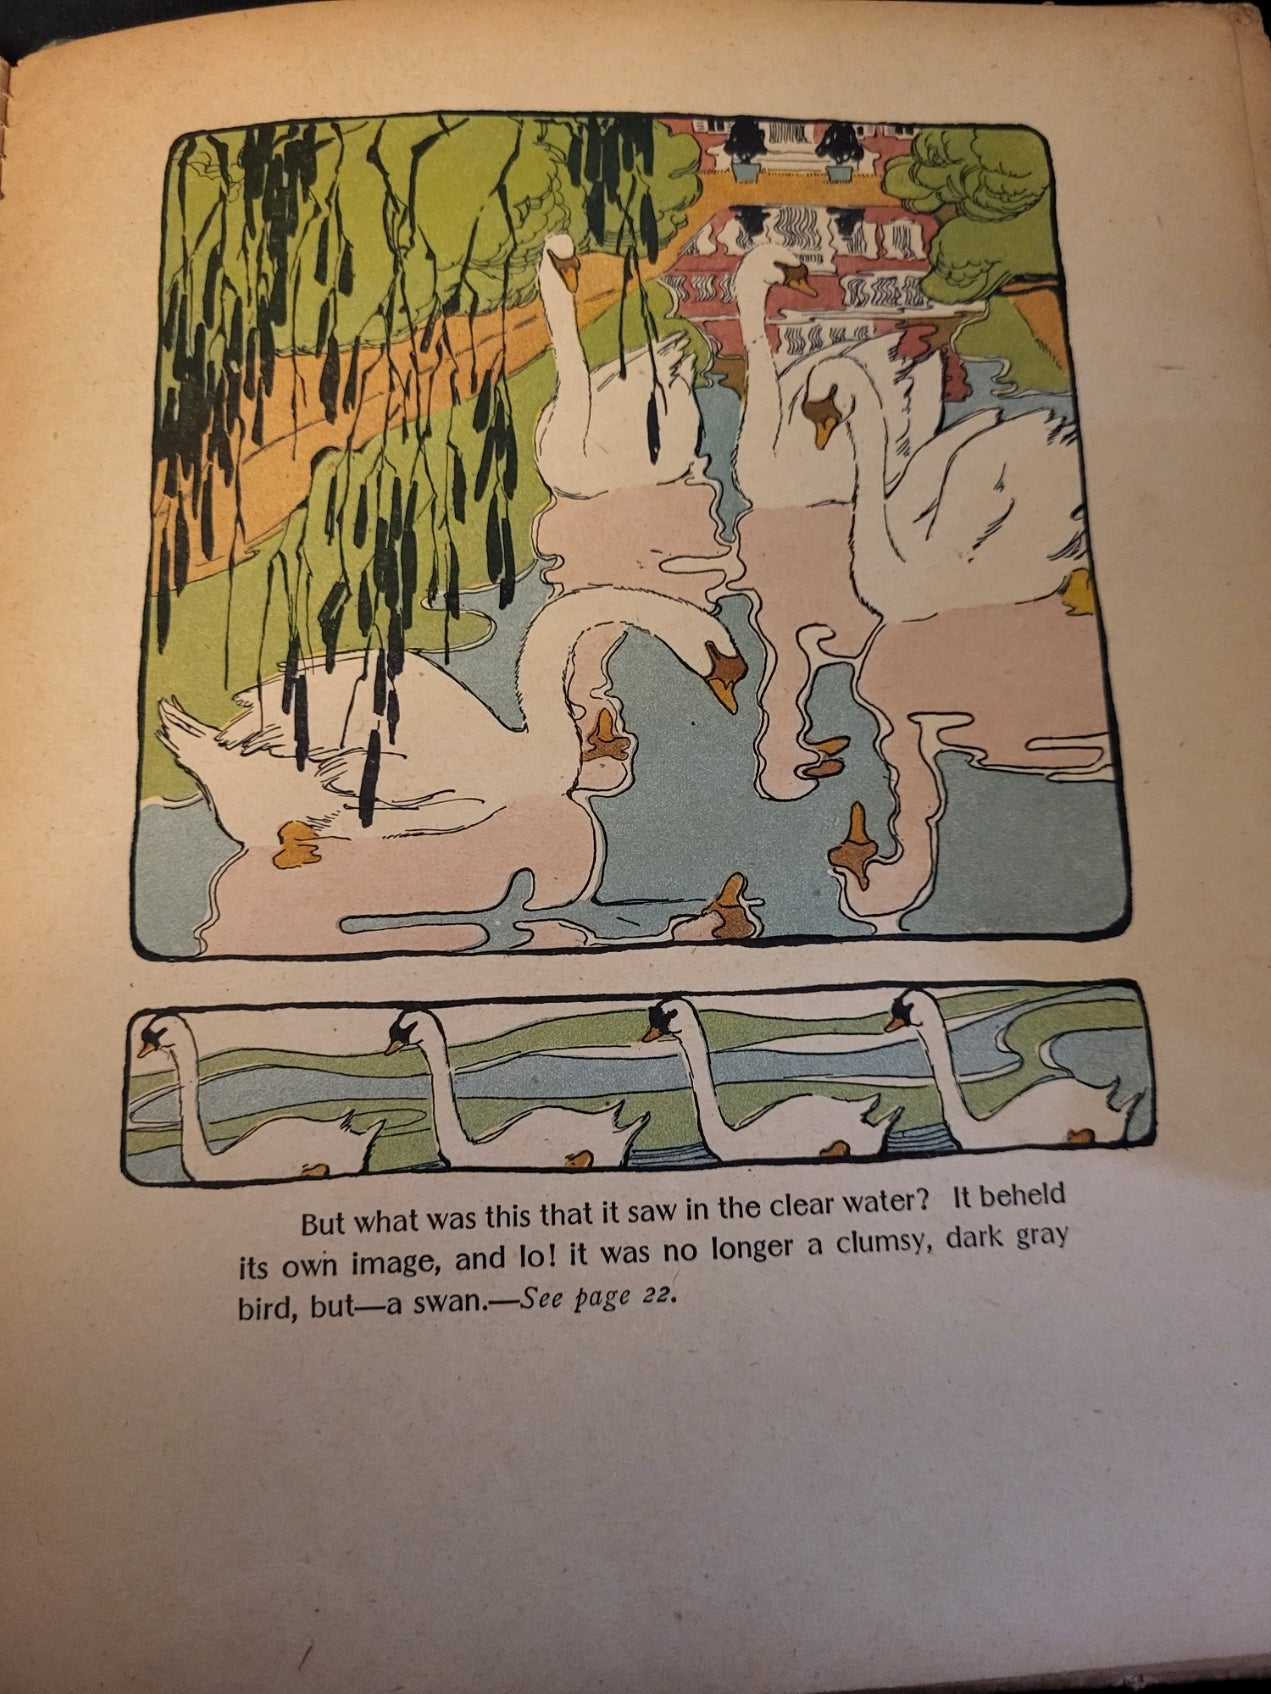 The Ugly Duckling Centenary Edition (1905)